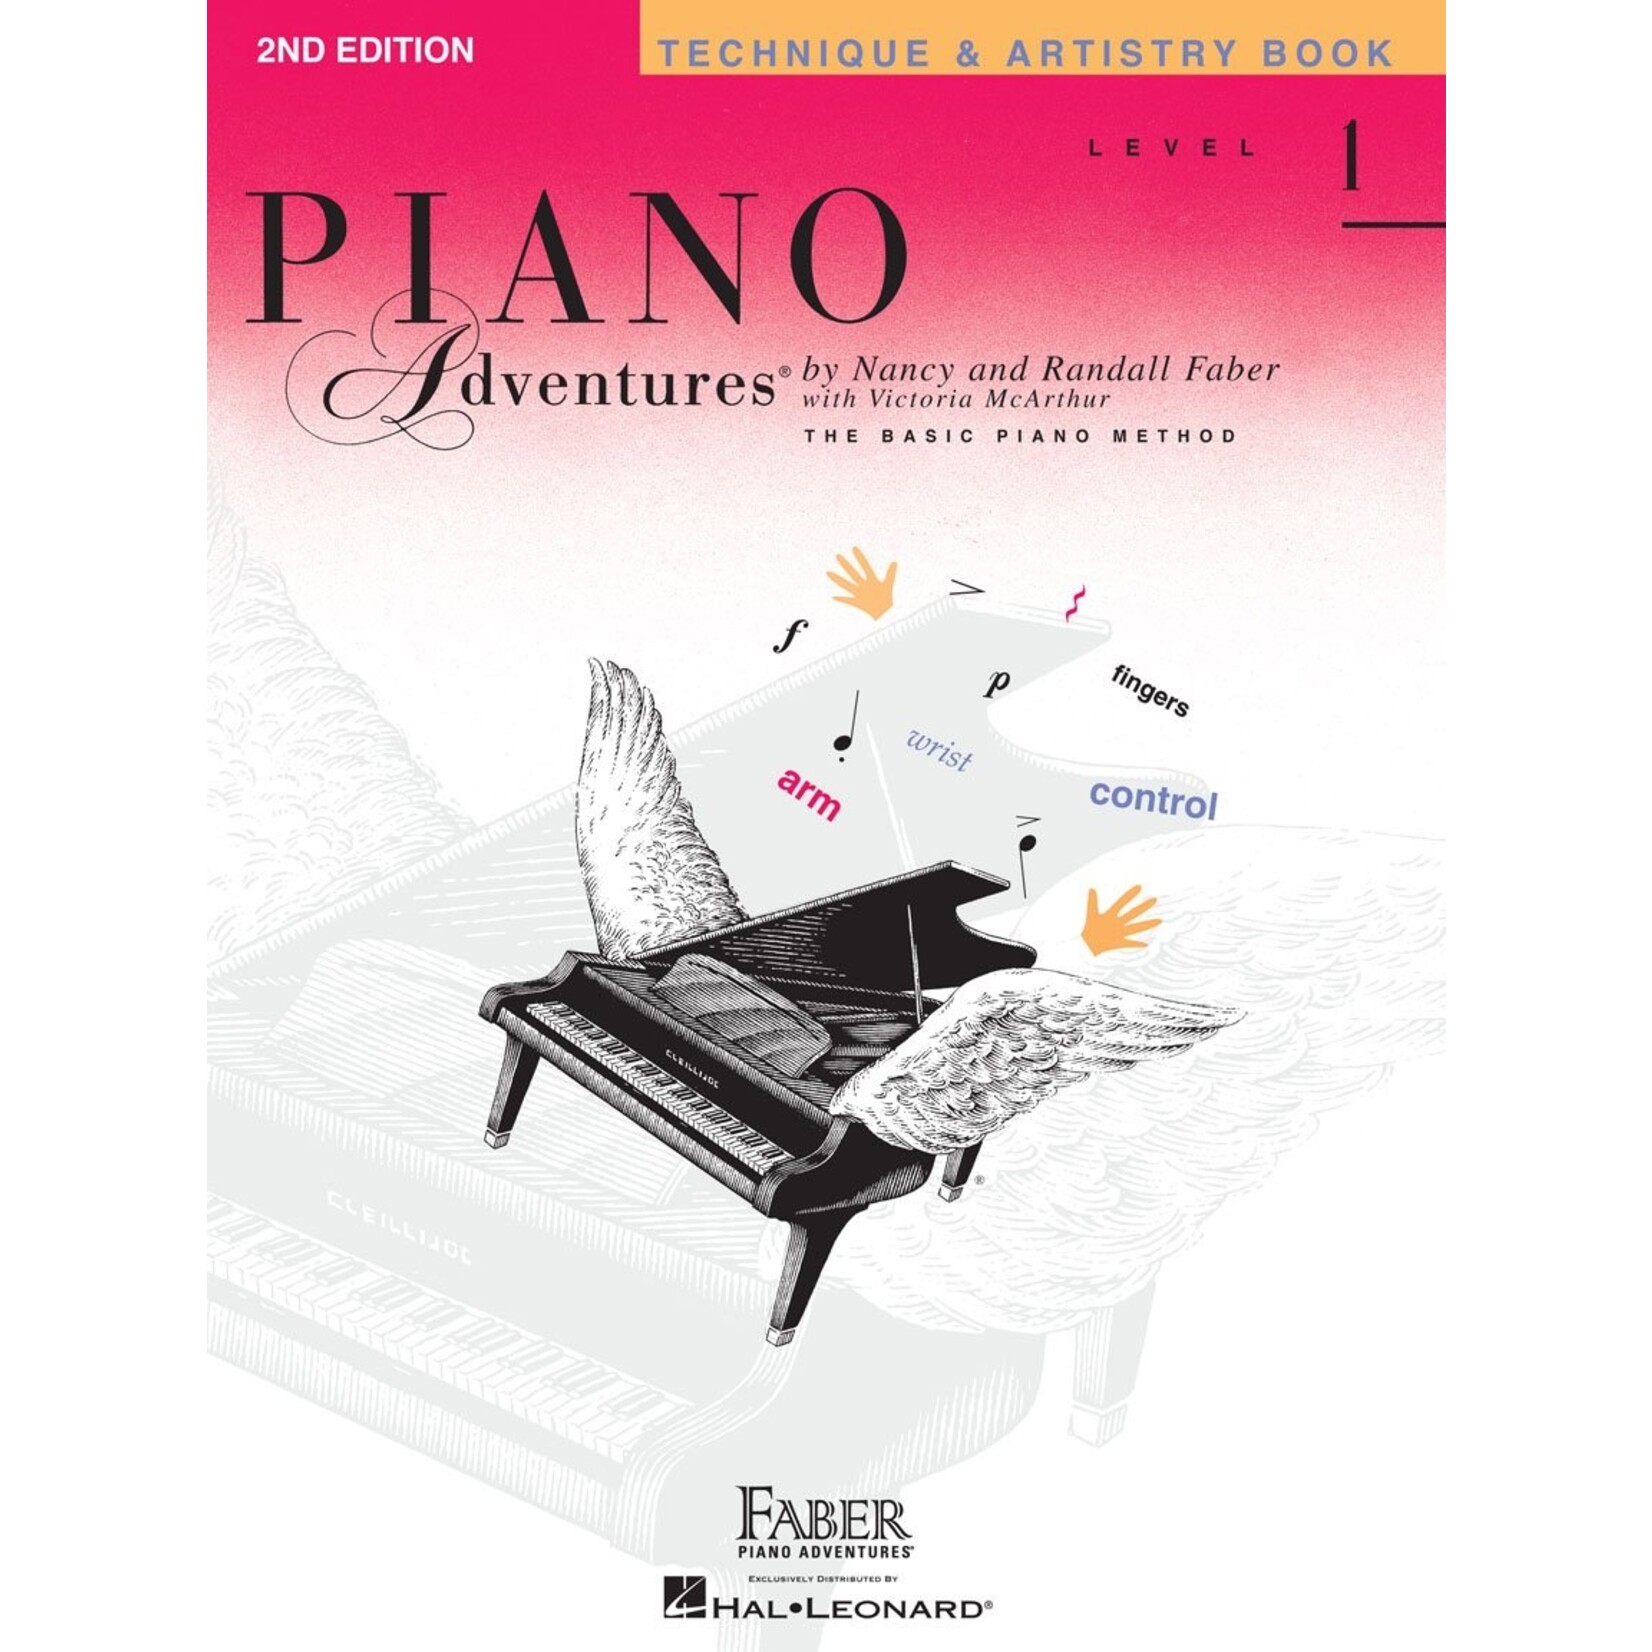 Faber Piano Adventures Level 1 - Technique & Artistry Book - 2nd Edition